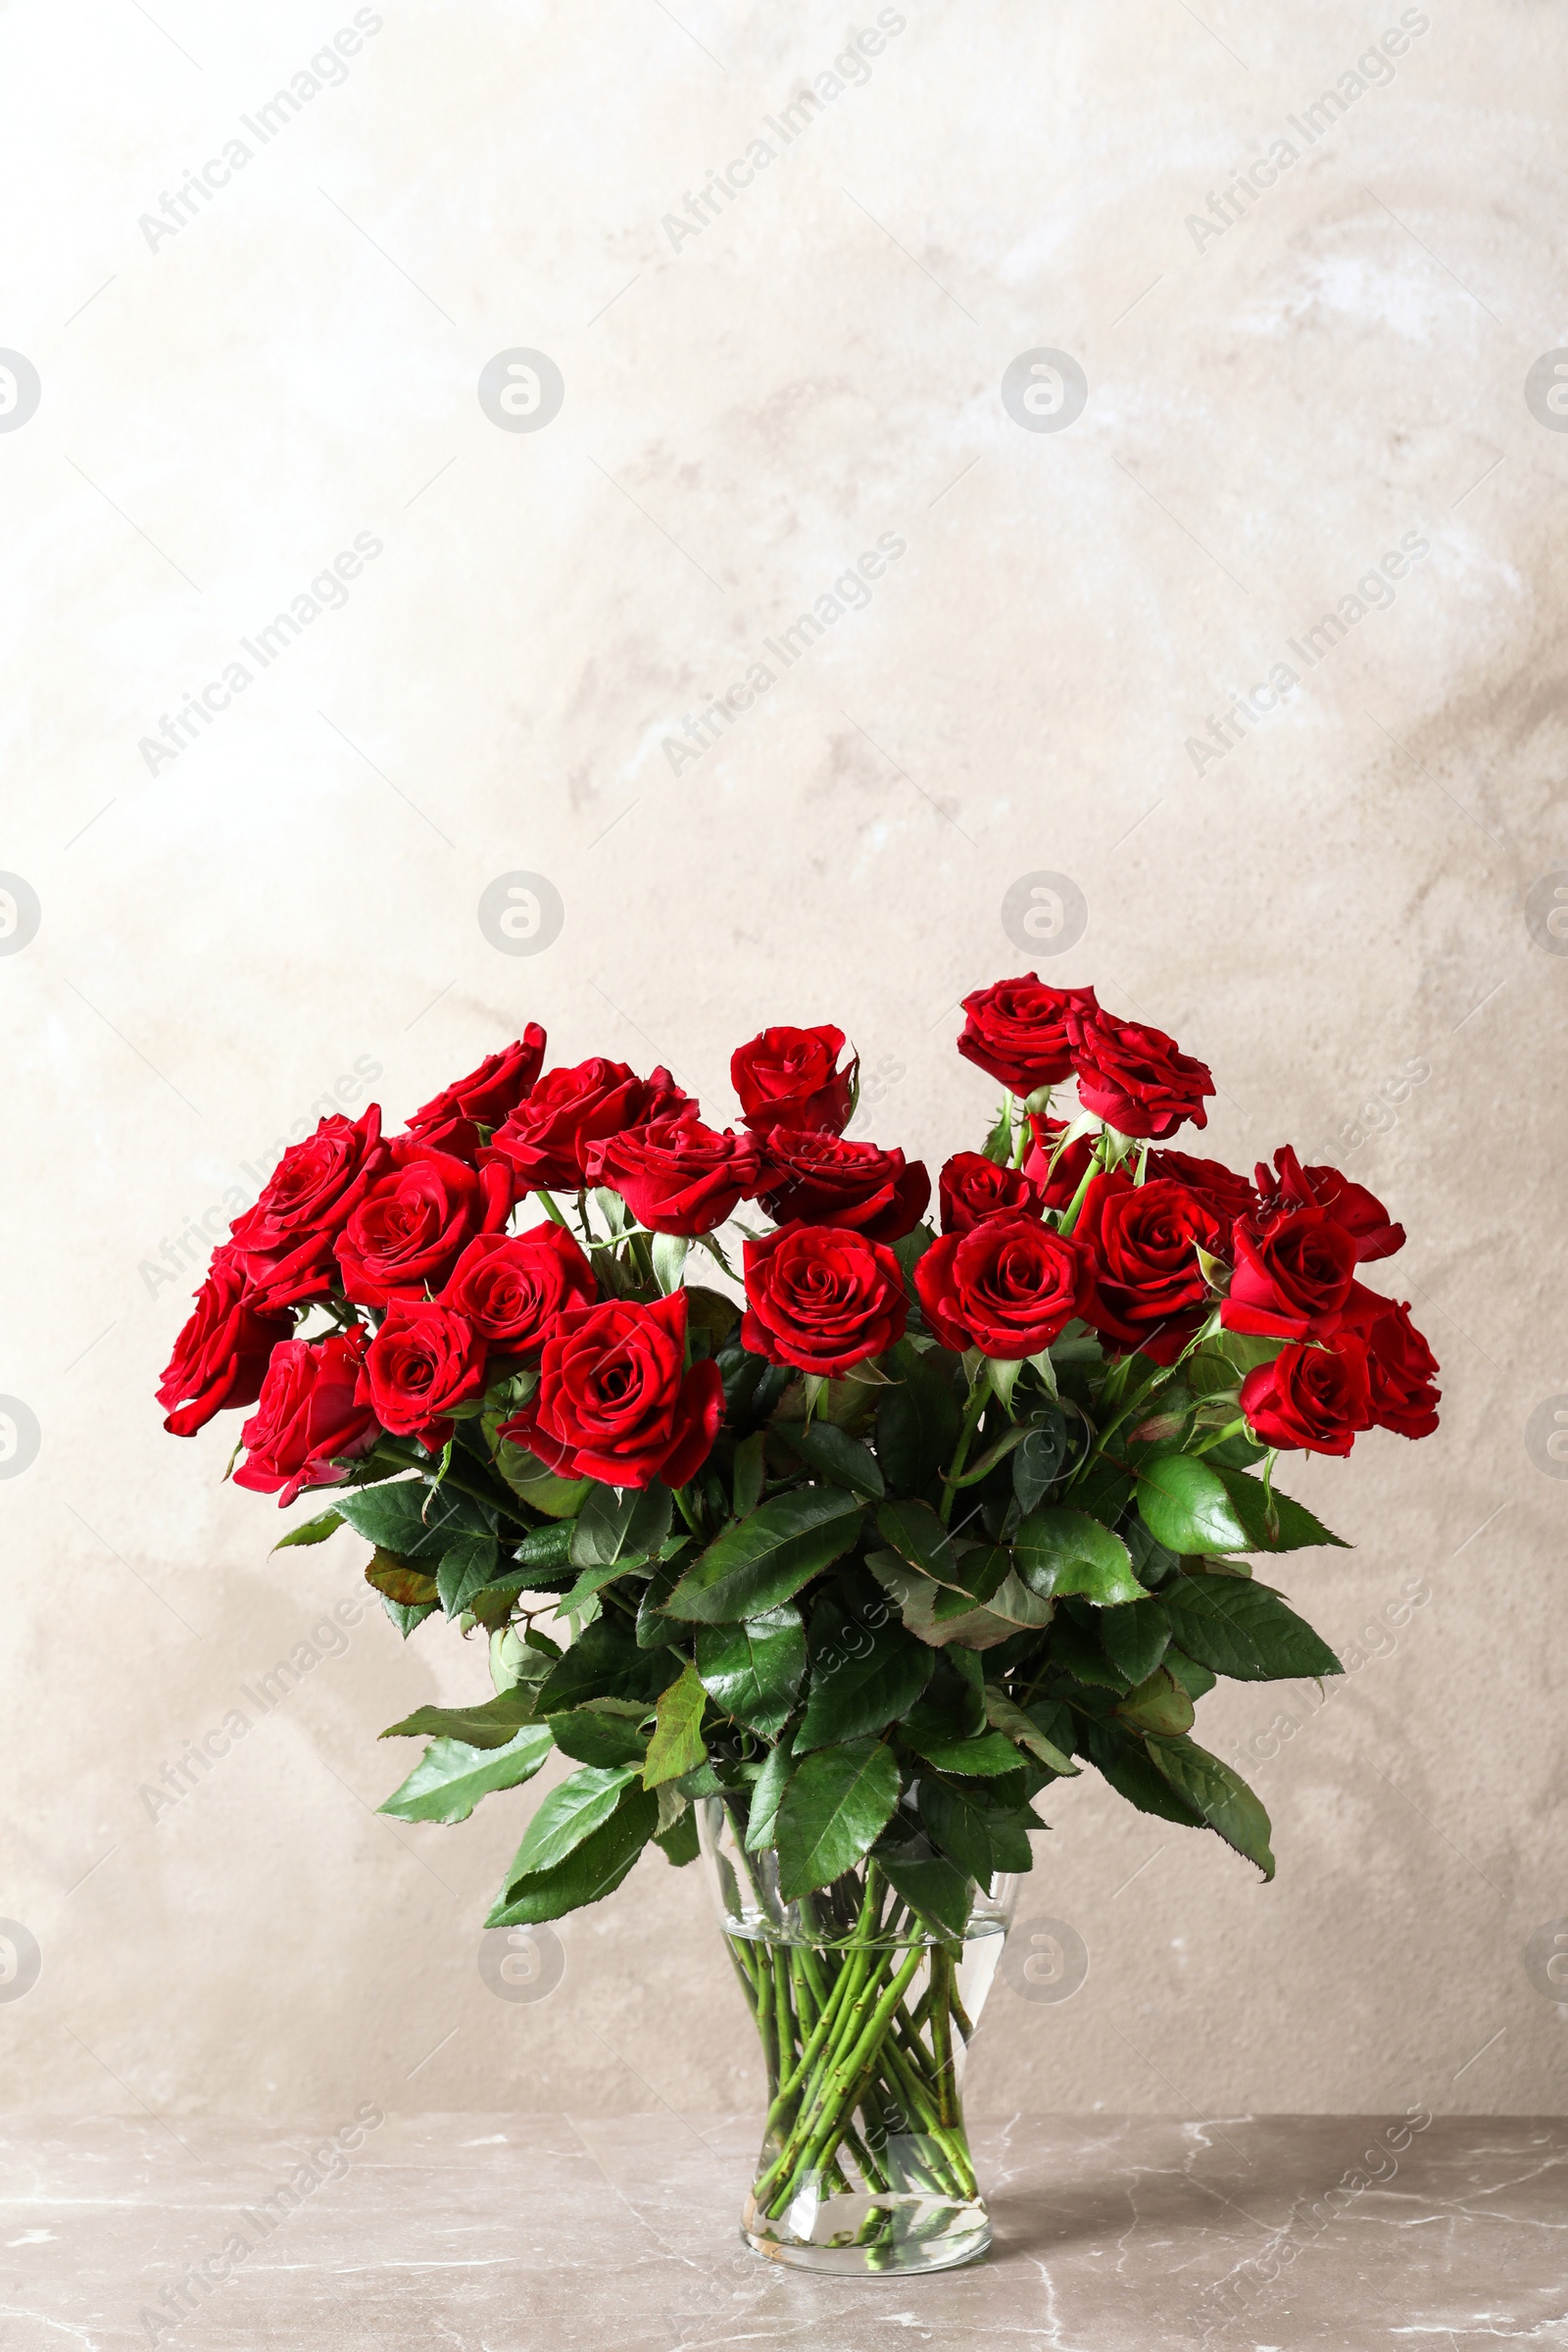 Photo of Vase with beautiful red roses on table against color background